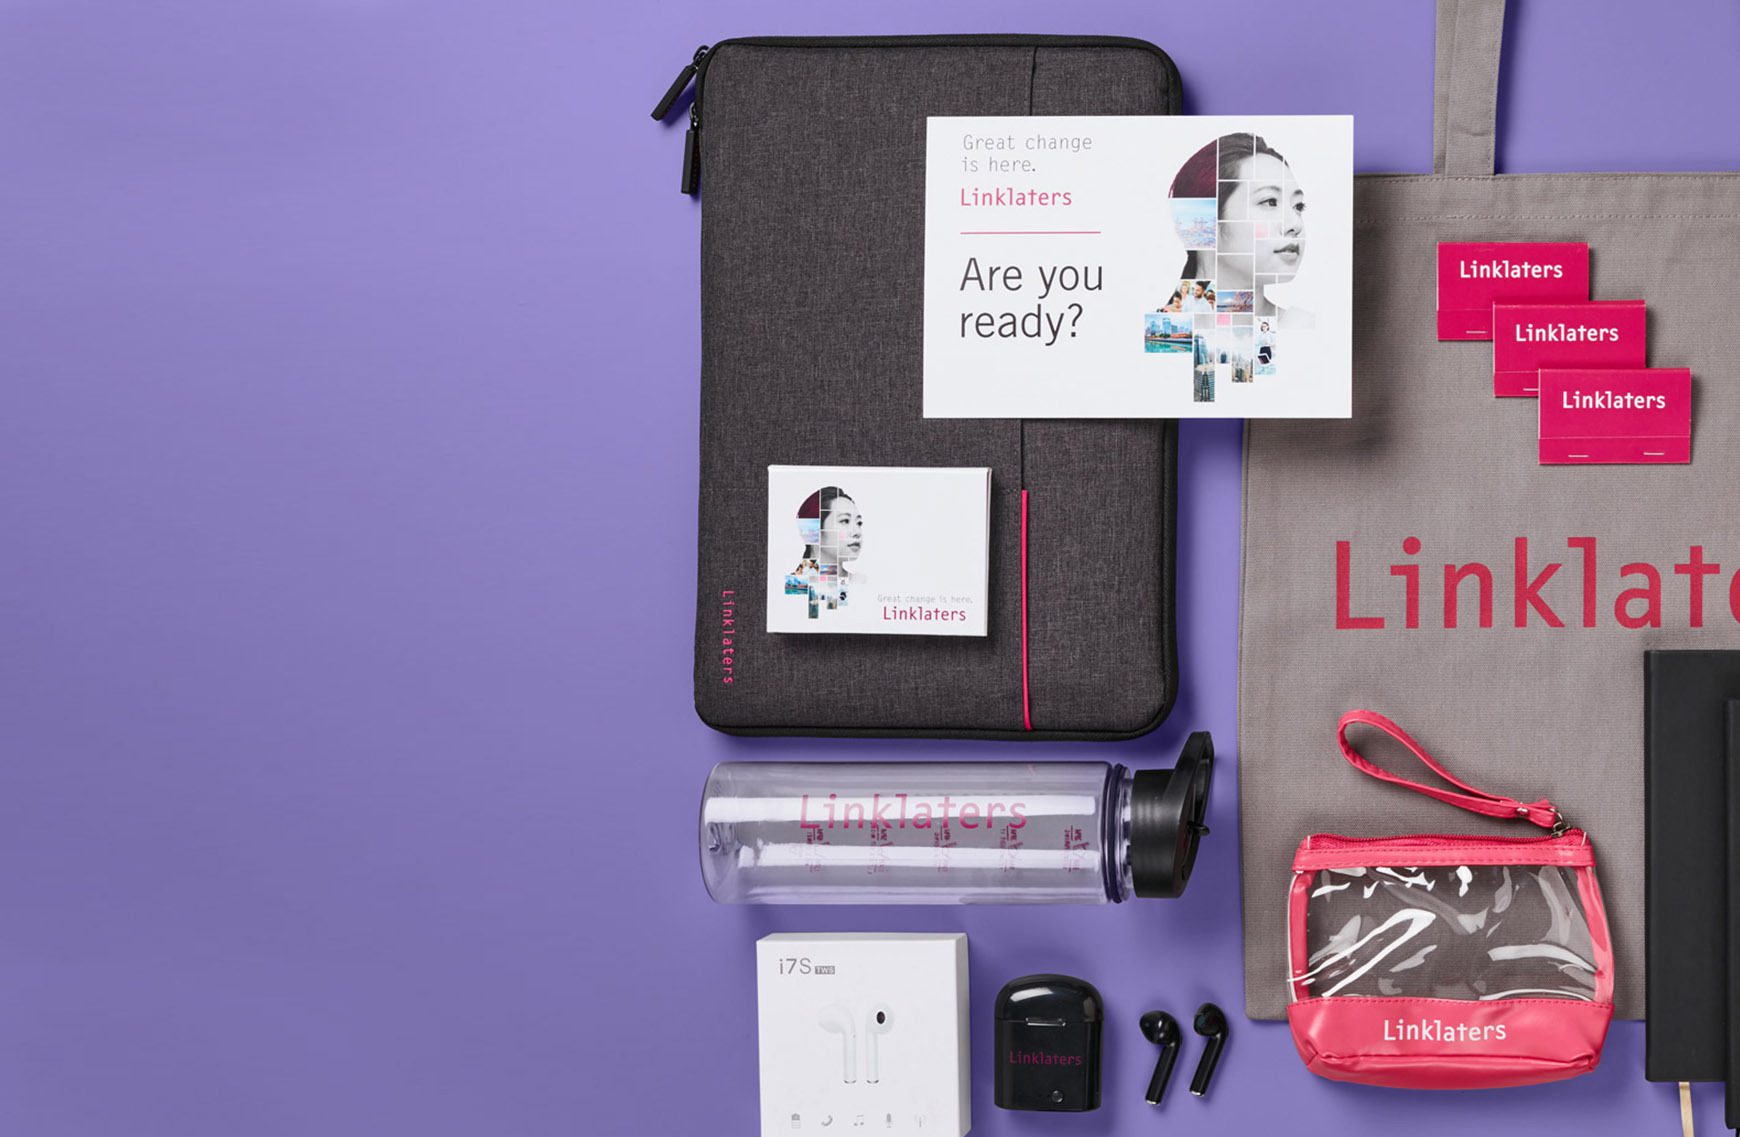 Collection of branded merchandise products such as tote bags and water bottles against purple backdrop.